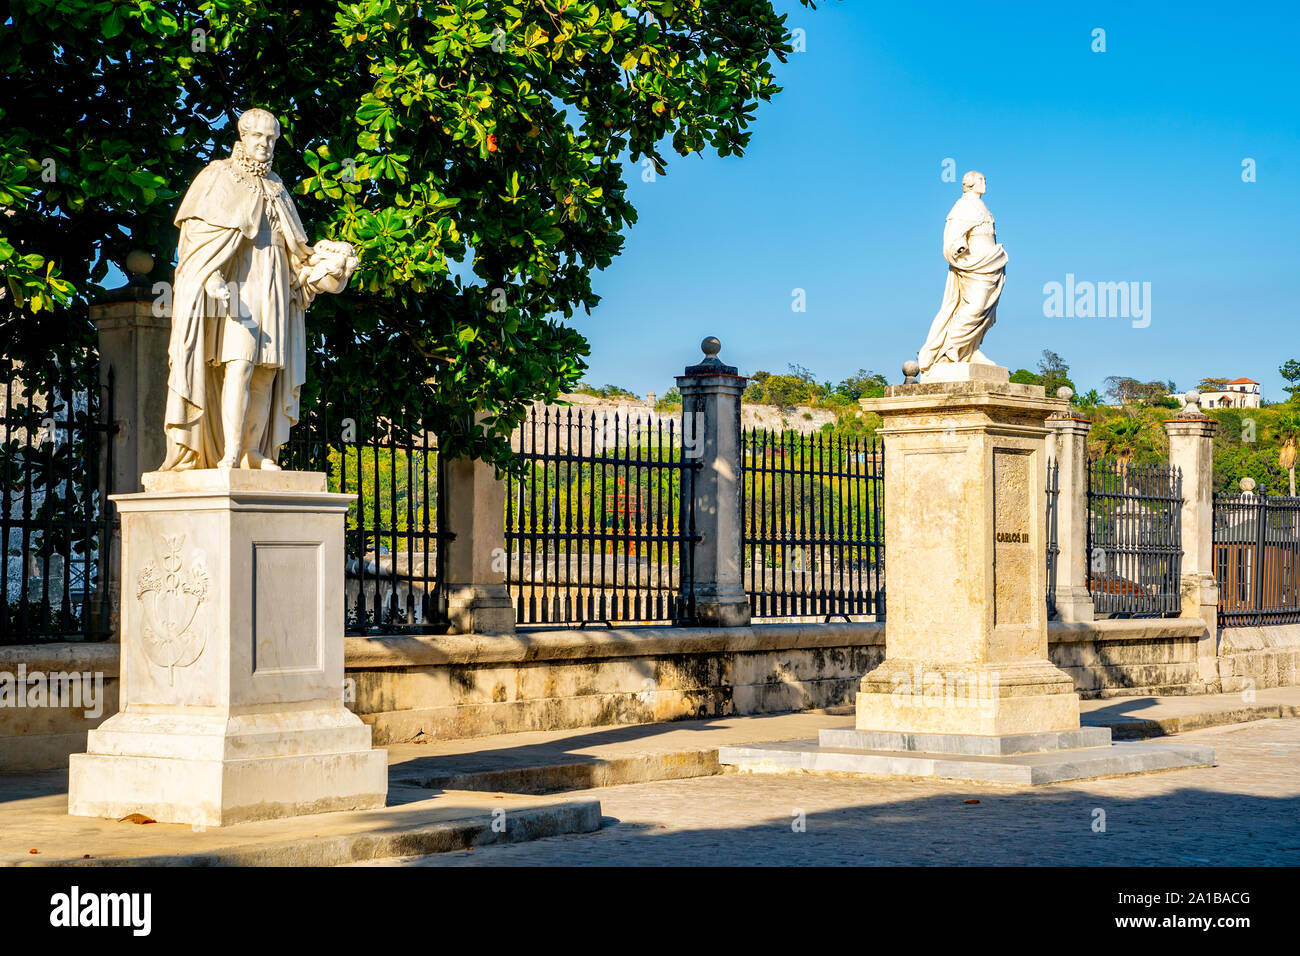 Public Park with Marble Statues in Old Havana, Cuba. Stock Photo